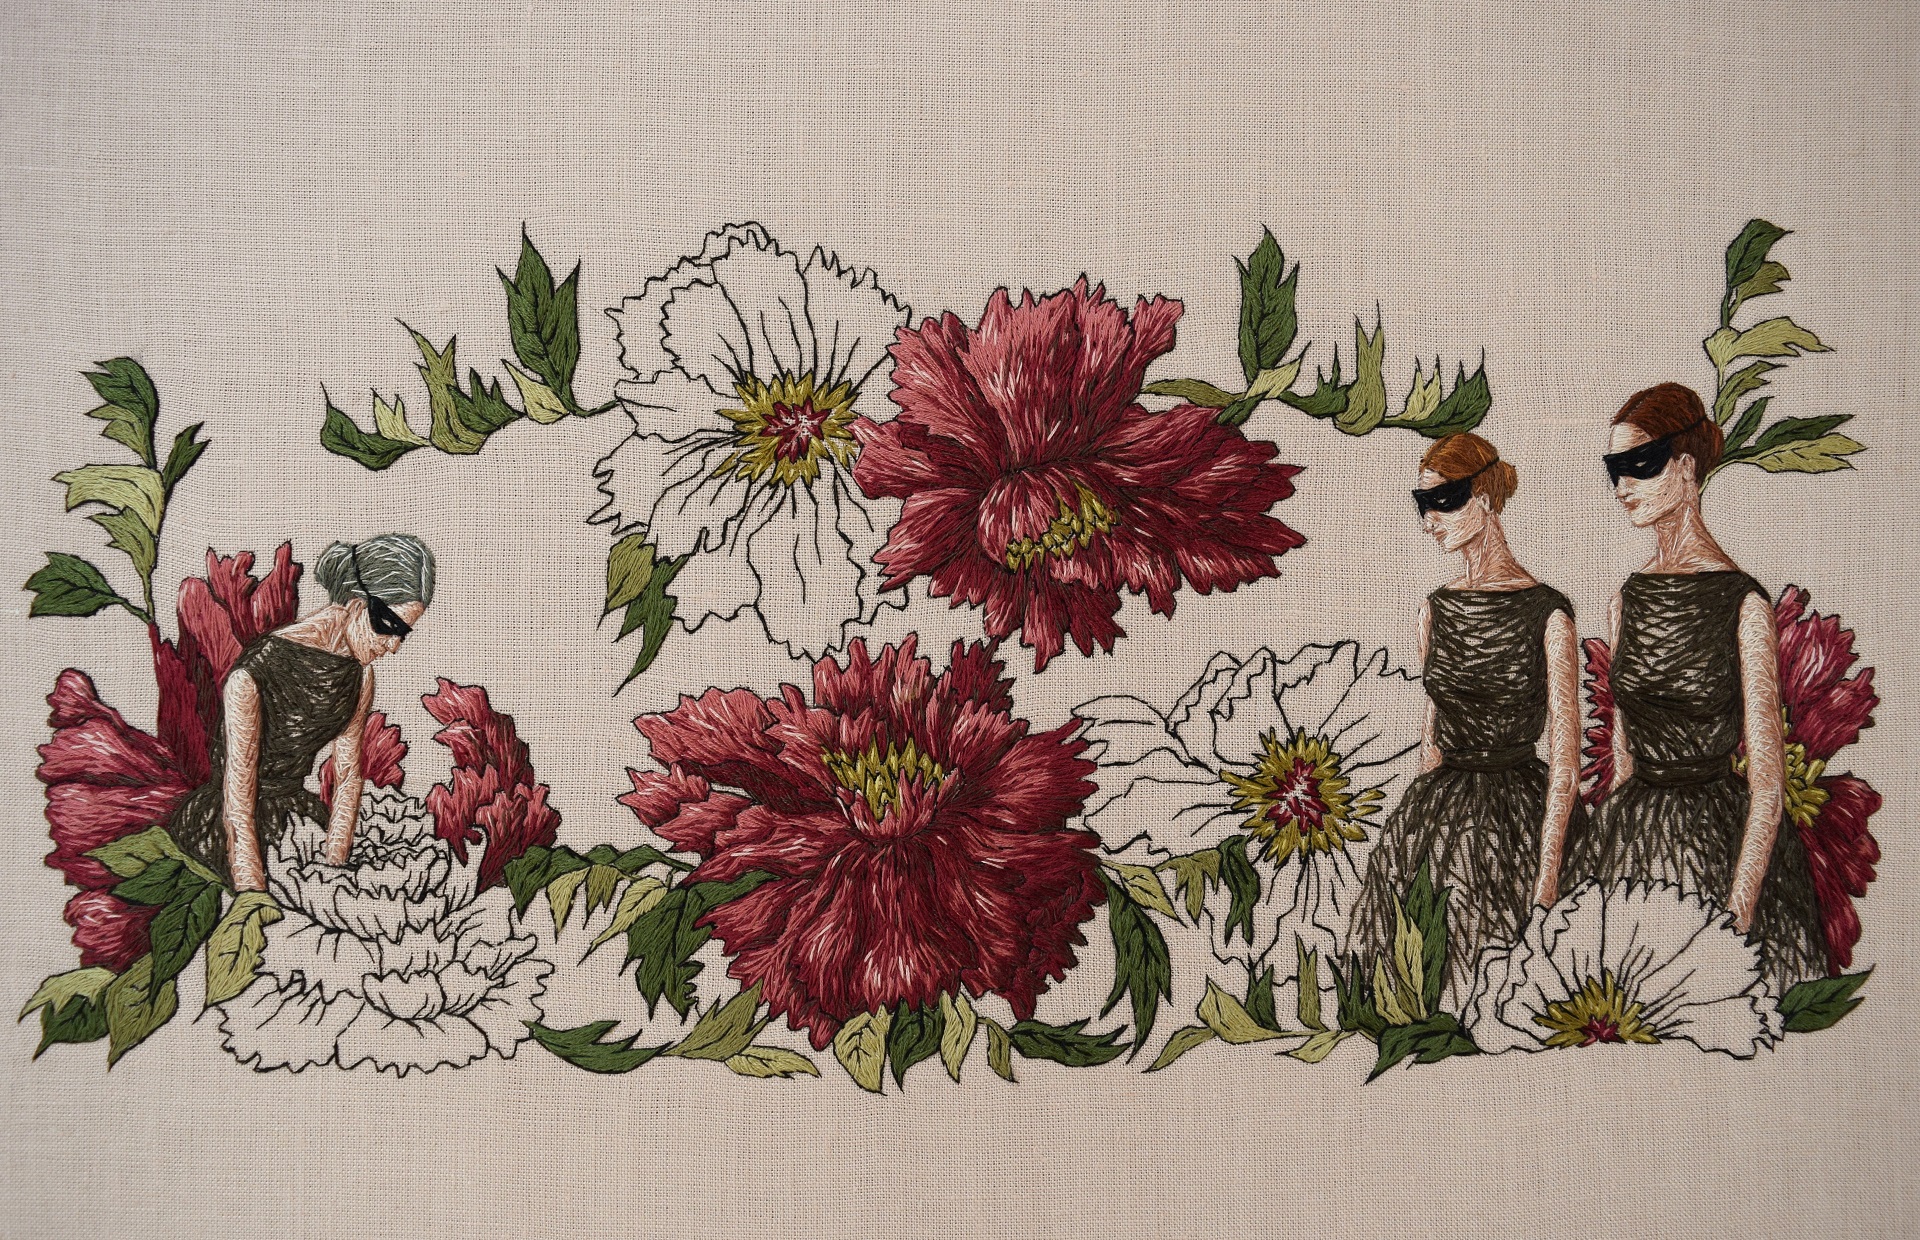 Floral Embroidery by Michelle Kingdom